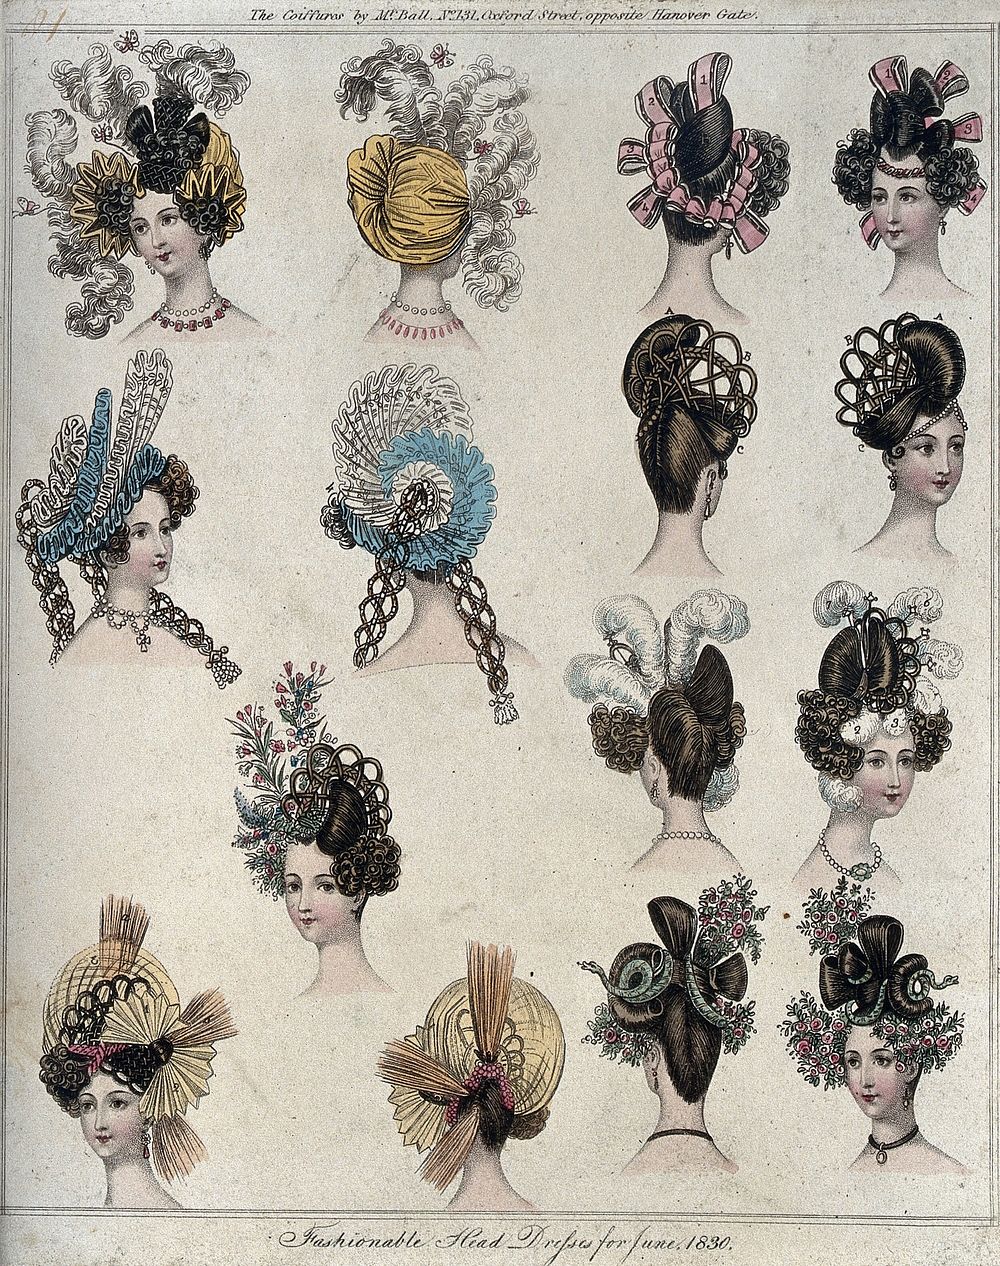 Fifteen heads of women wearing fashionable head-dresses and hair accessories. Coloured engraving.